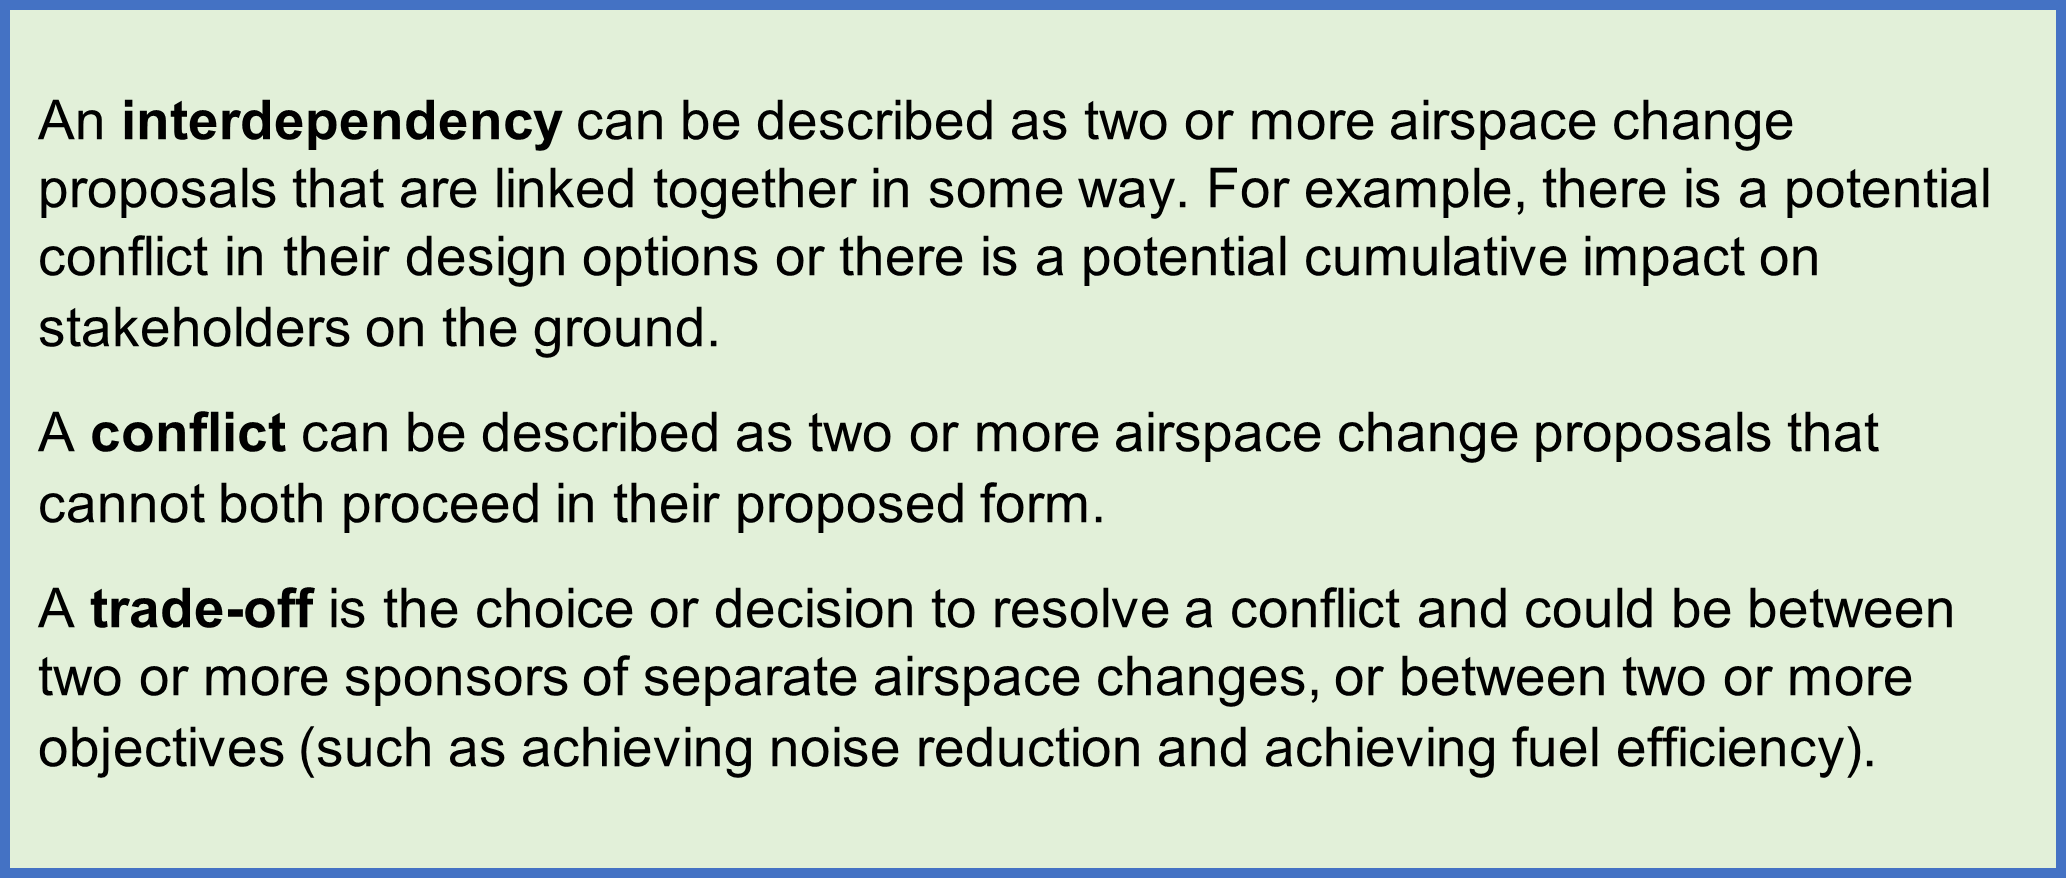 An interdependency can be described as two or more airspace change proposals that are linked together in some way. For example, there is a potential conflict in their design options or there is a potential cumulative impact on stakeholders on the ground.  A conflict can be described as two or more airspace change proposals that cannot both proceed in their proposed form.  A trade-off is the choice or decision to resolve a conflict and could be between two or more sponsors of separate airspace changes, or between two or more objectives (such as achieving noise reduction and achieving fuel efficiency).